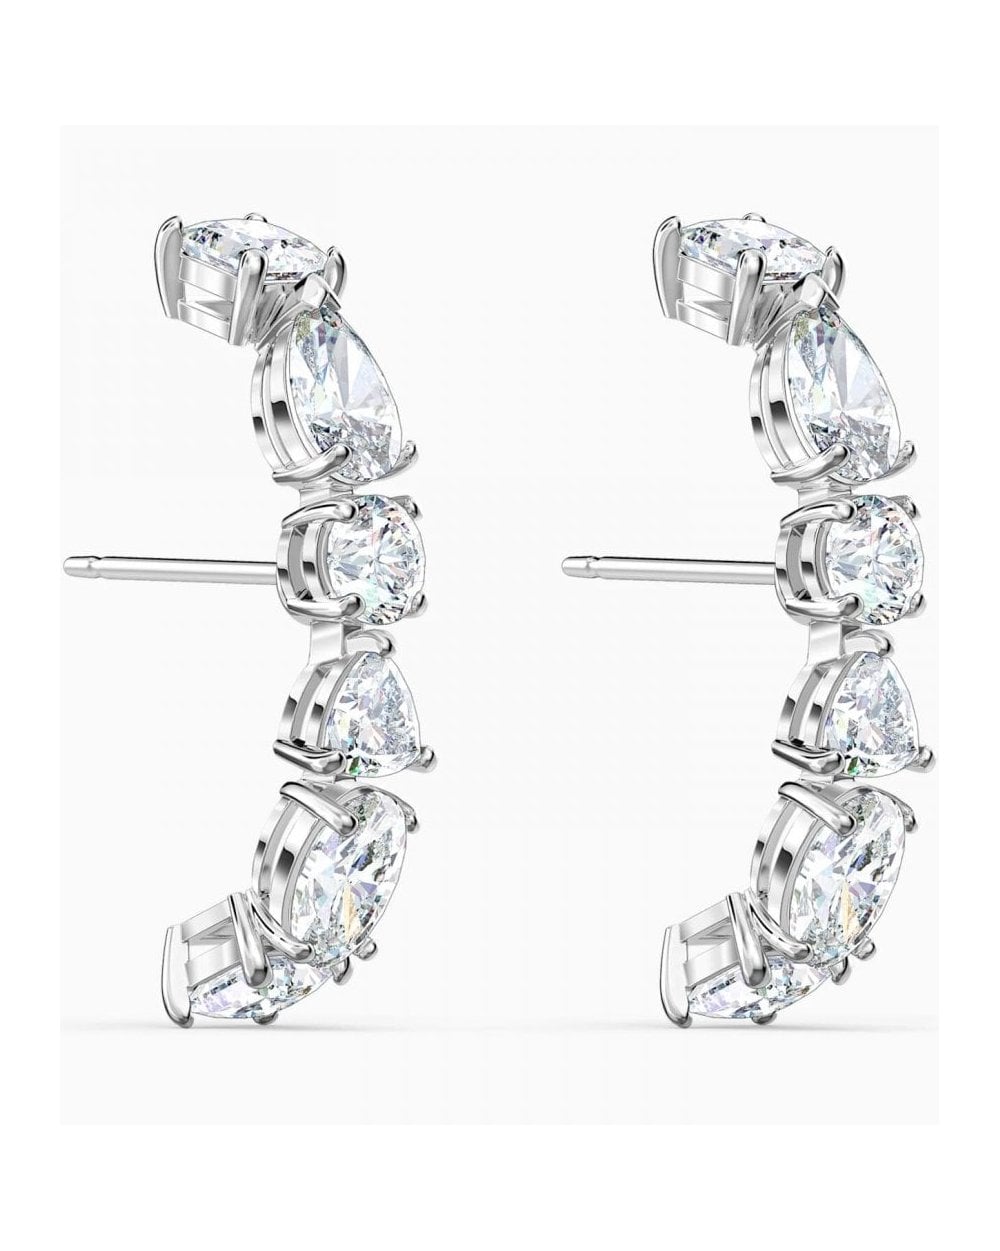 Tennis Deluxe Mixed Pierced Earrings, White, Rhodium Plated